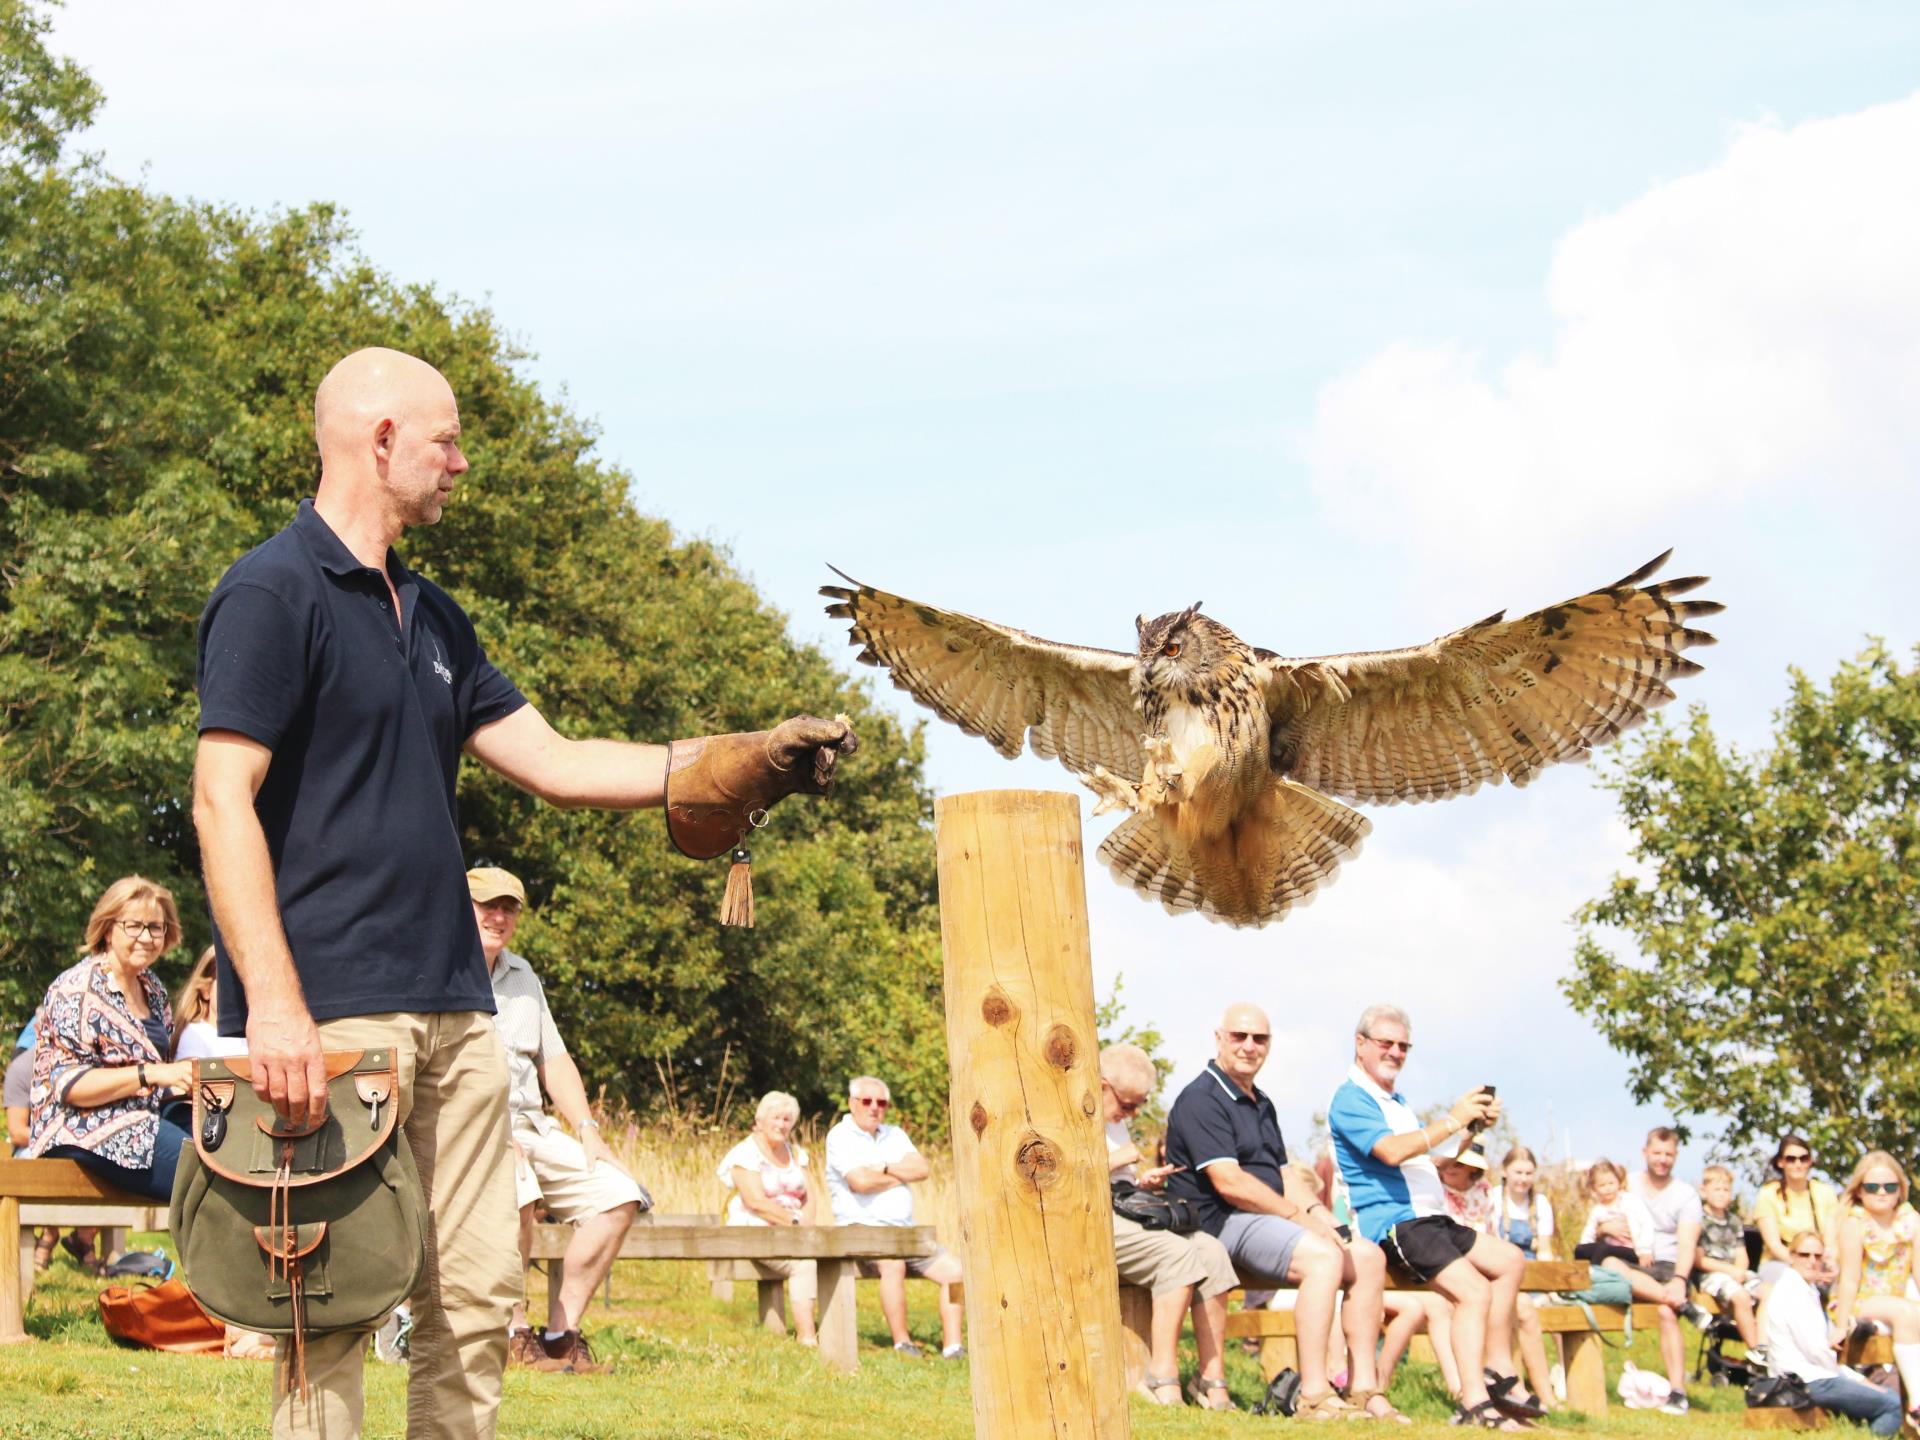 Flying Show at The British Bird of Prey Centre